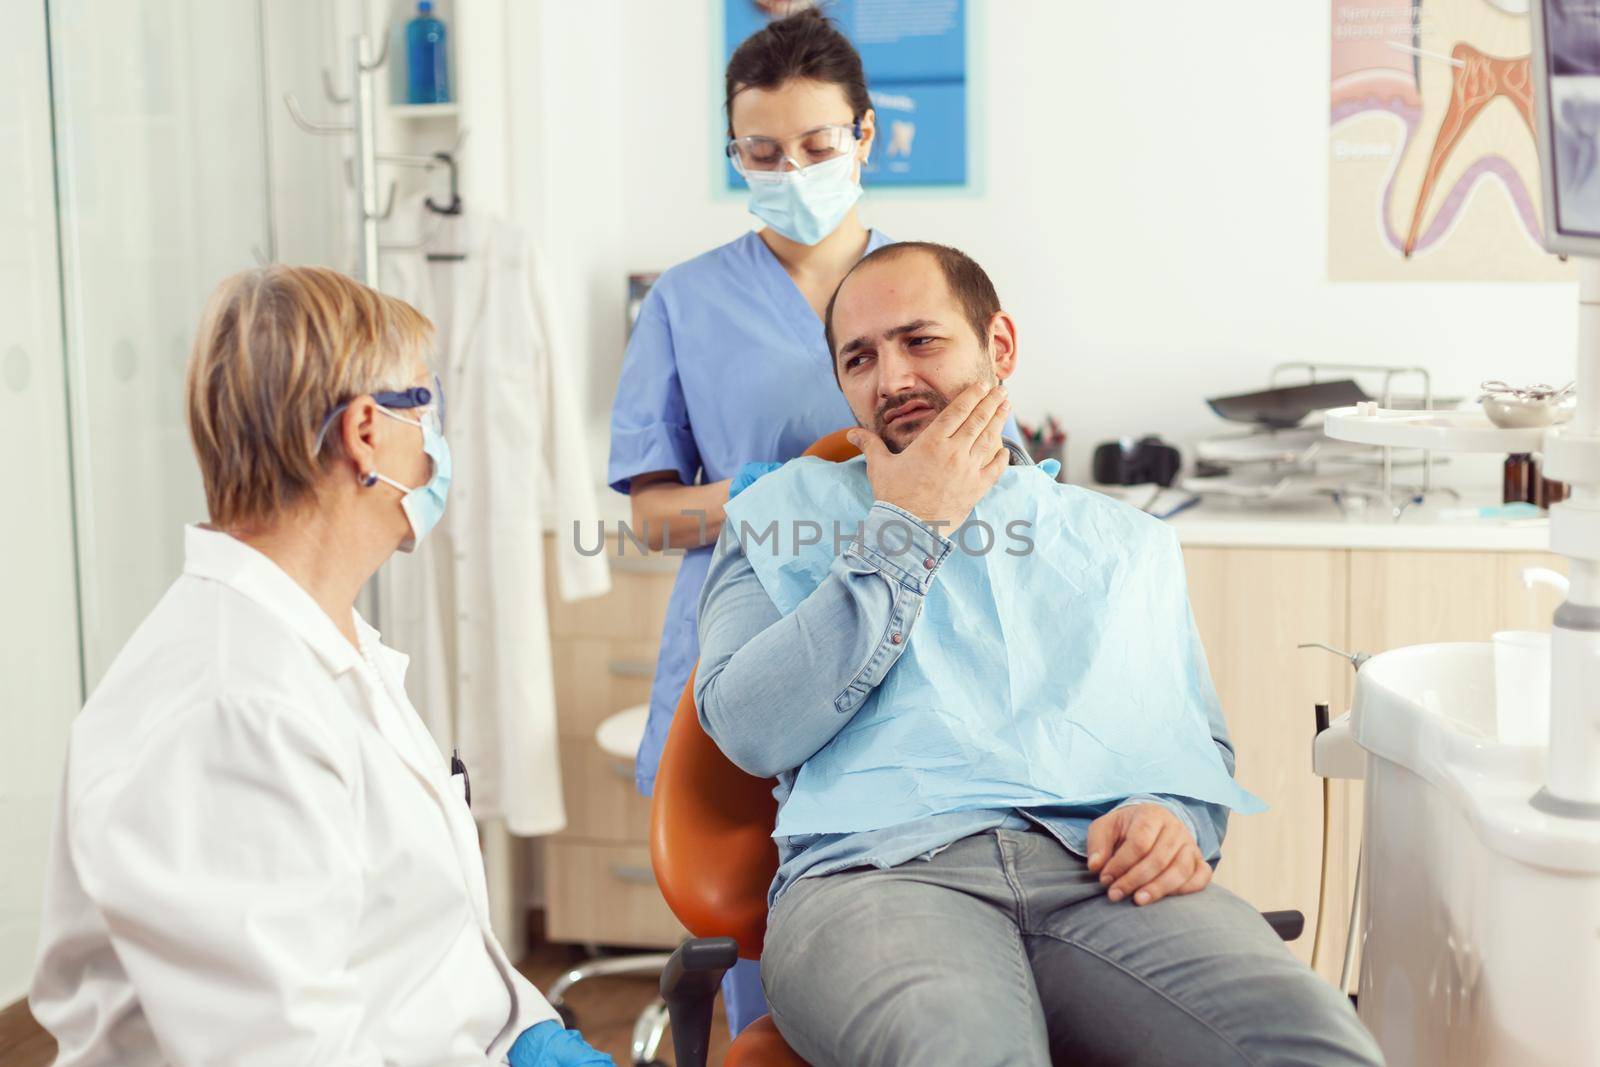 Stomatologist doctor talking to man patient with toothache by DCStudio